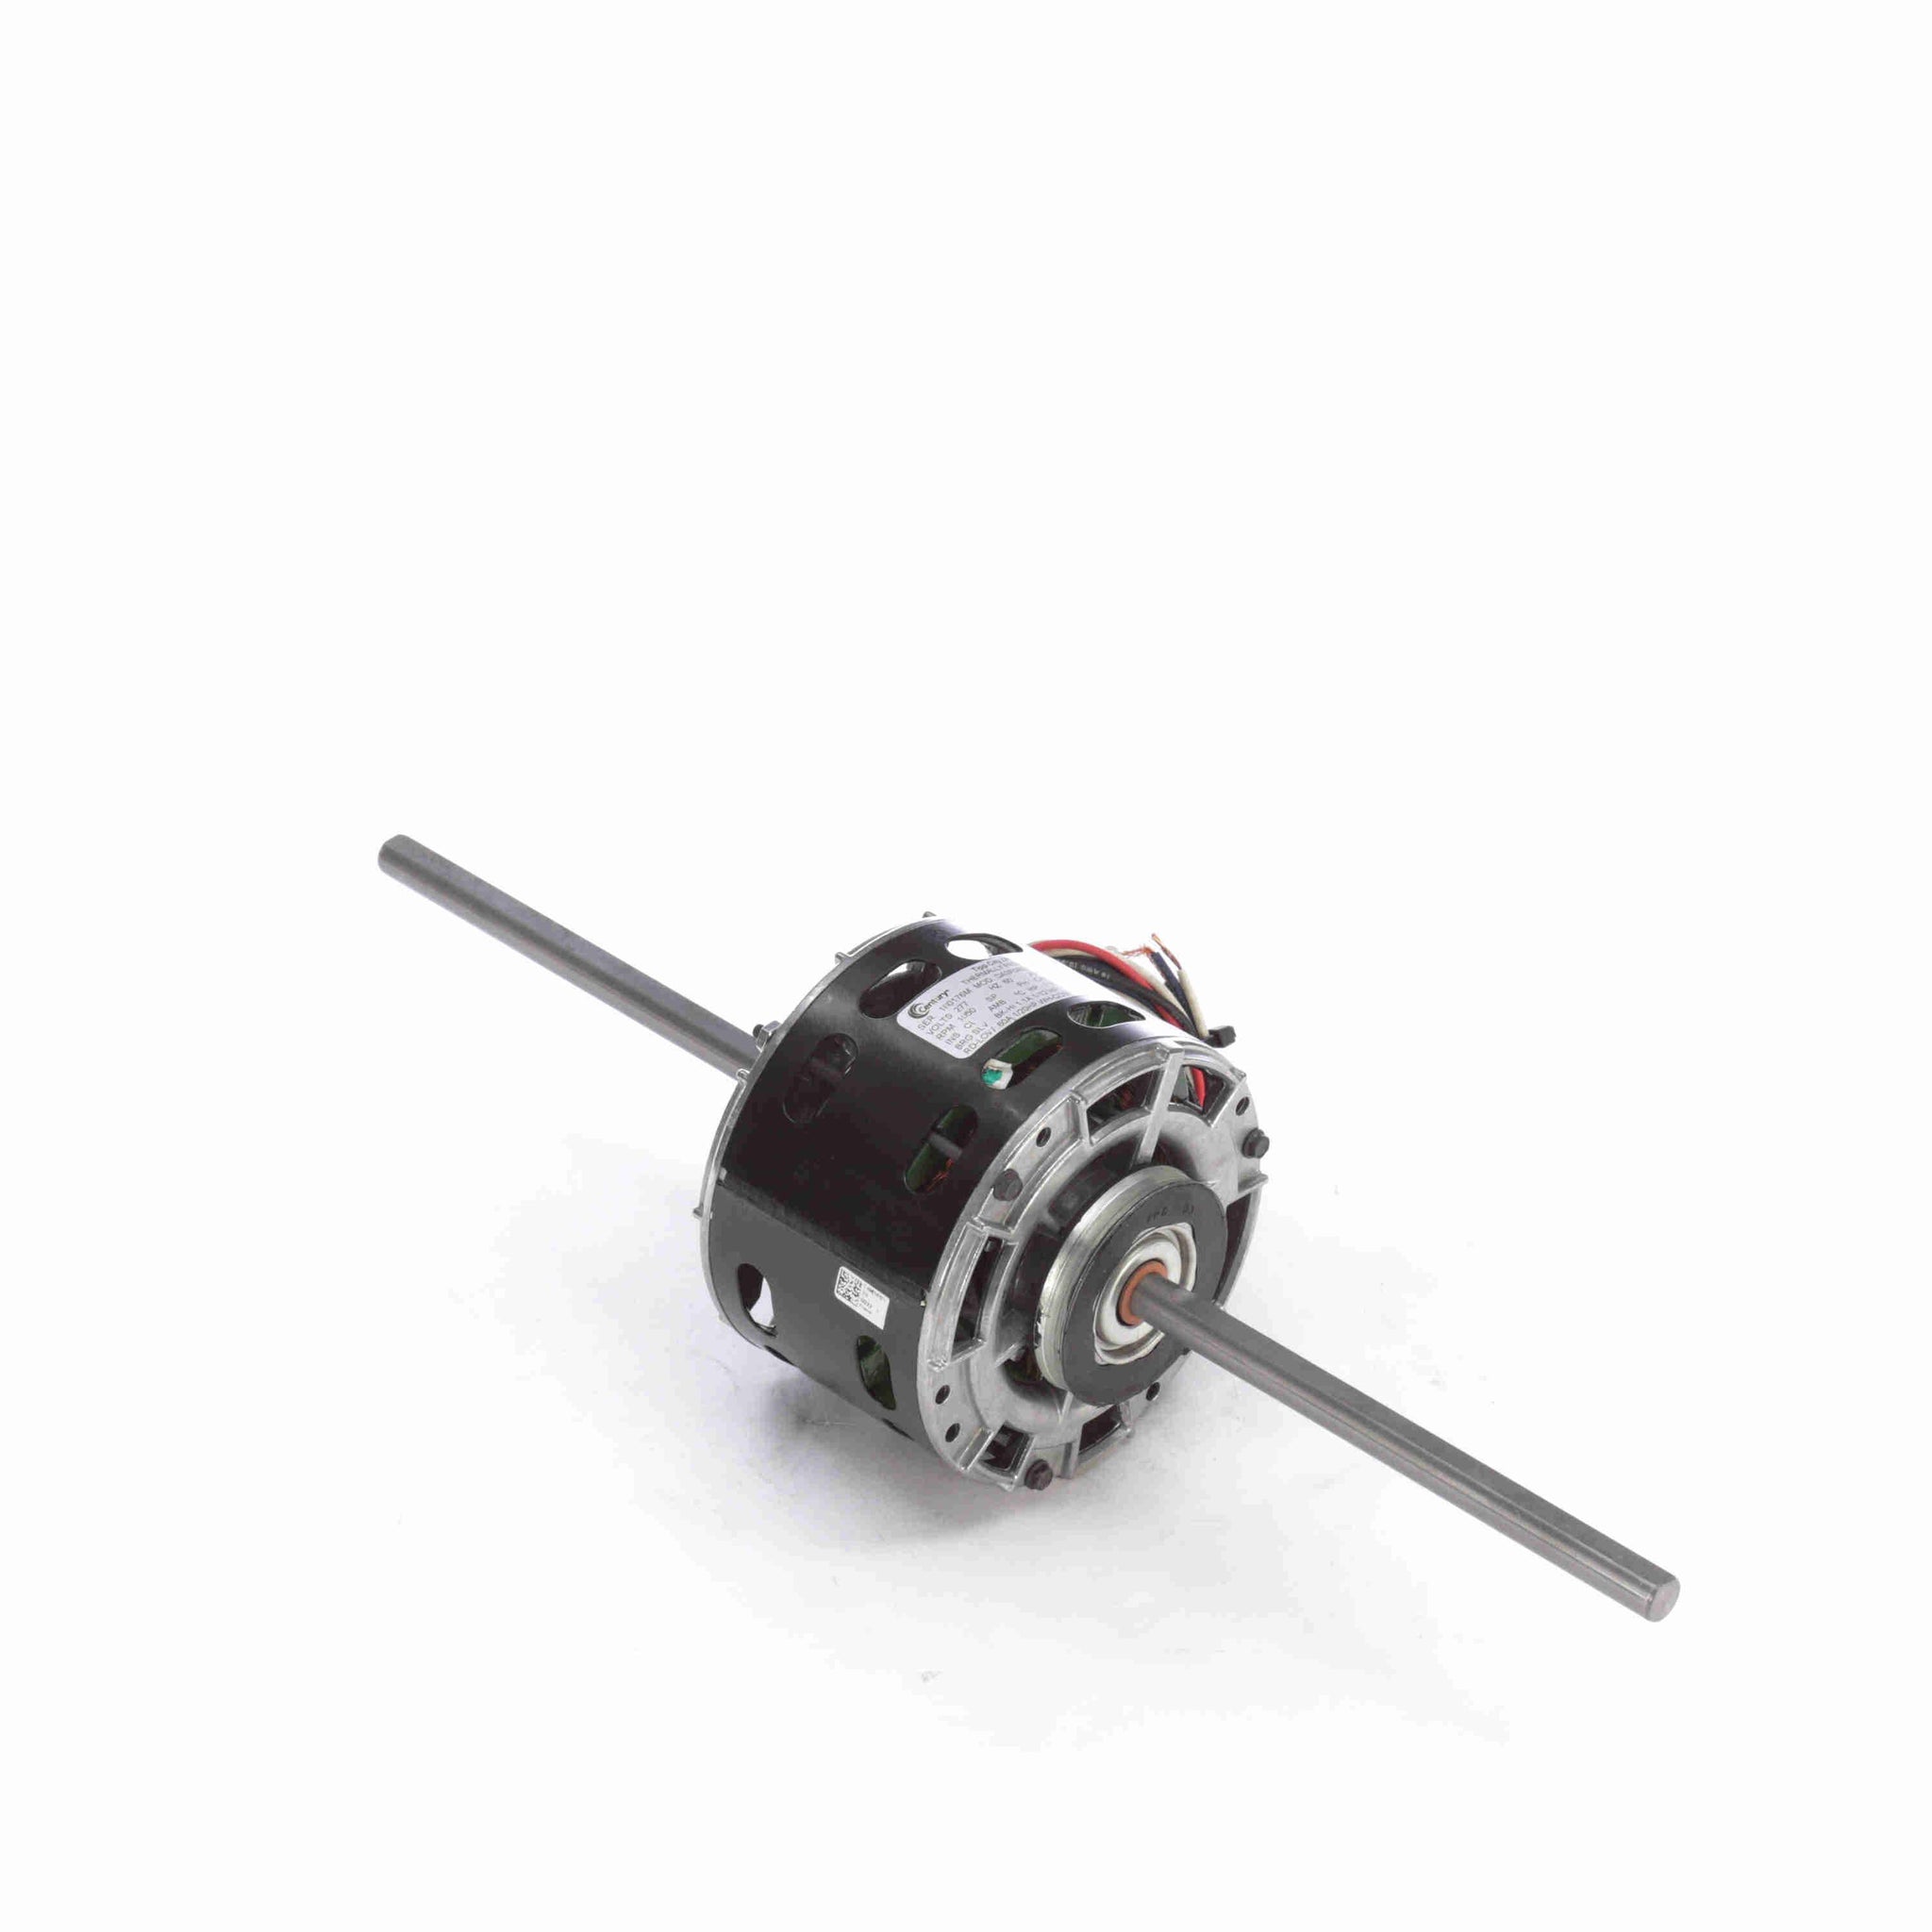 9648 -  1/3 HP OEM Replacement Motor, 1300 RPM, 4 Speed, 230 Volts, 48 Frame, Semi Enclosed - Hardware & Moreee